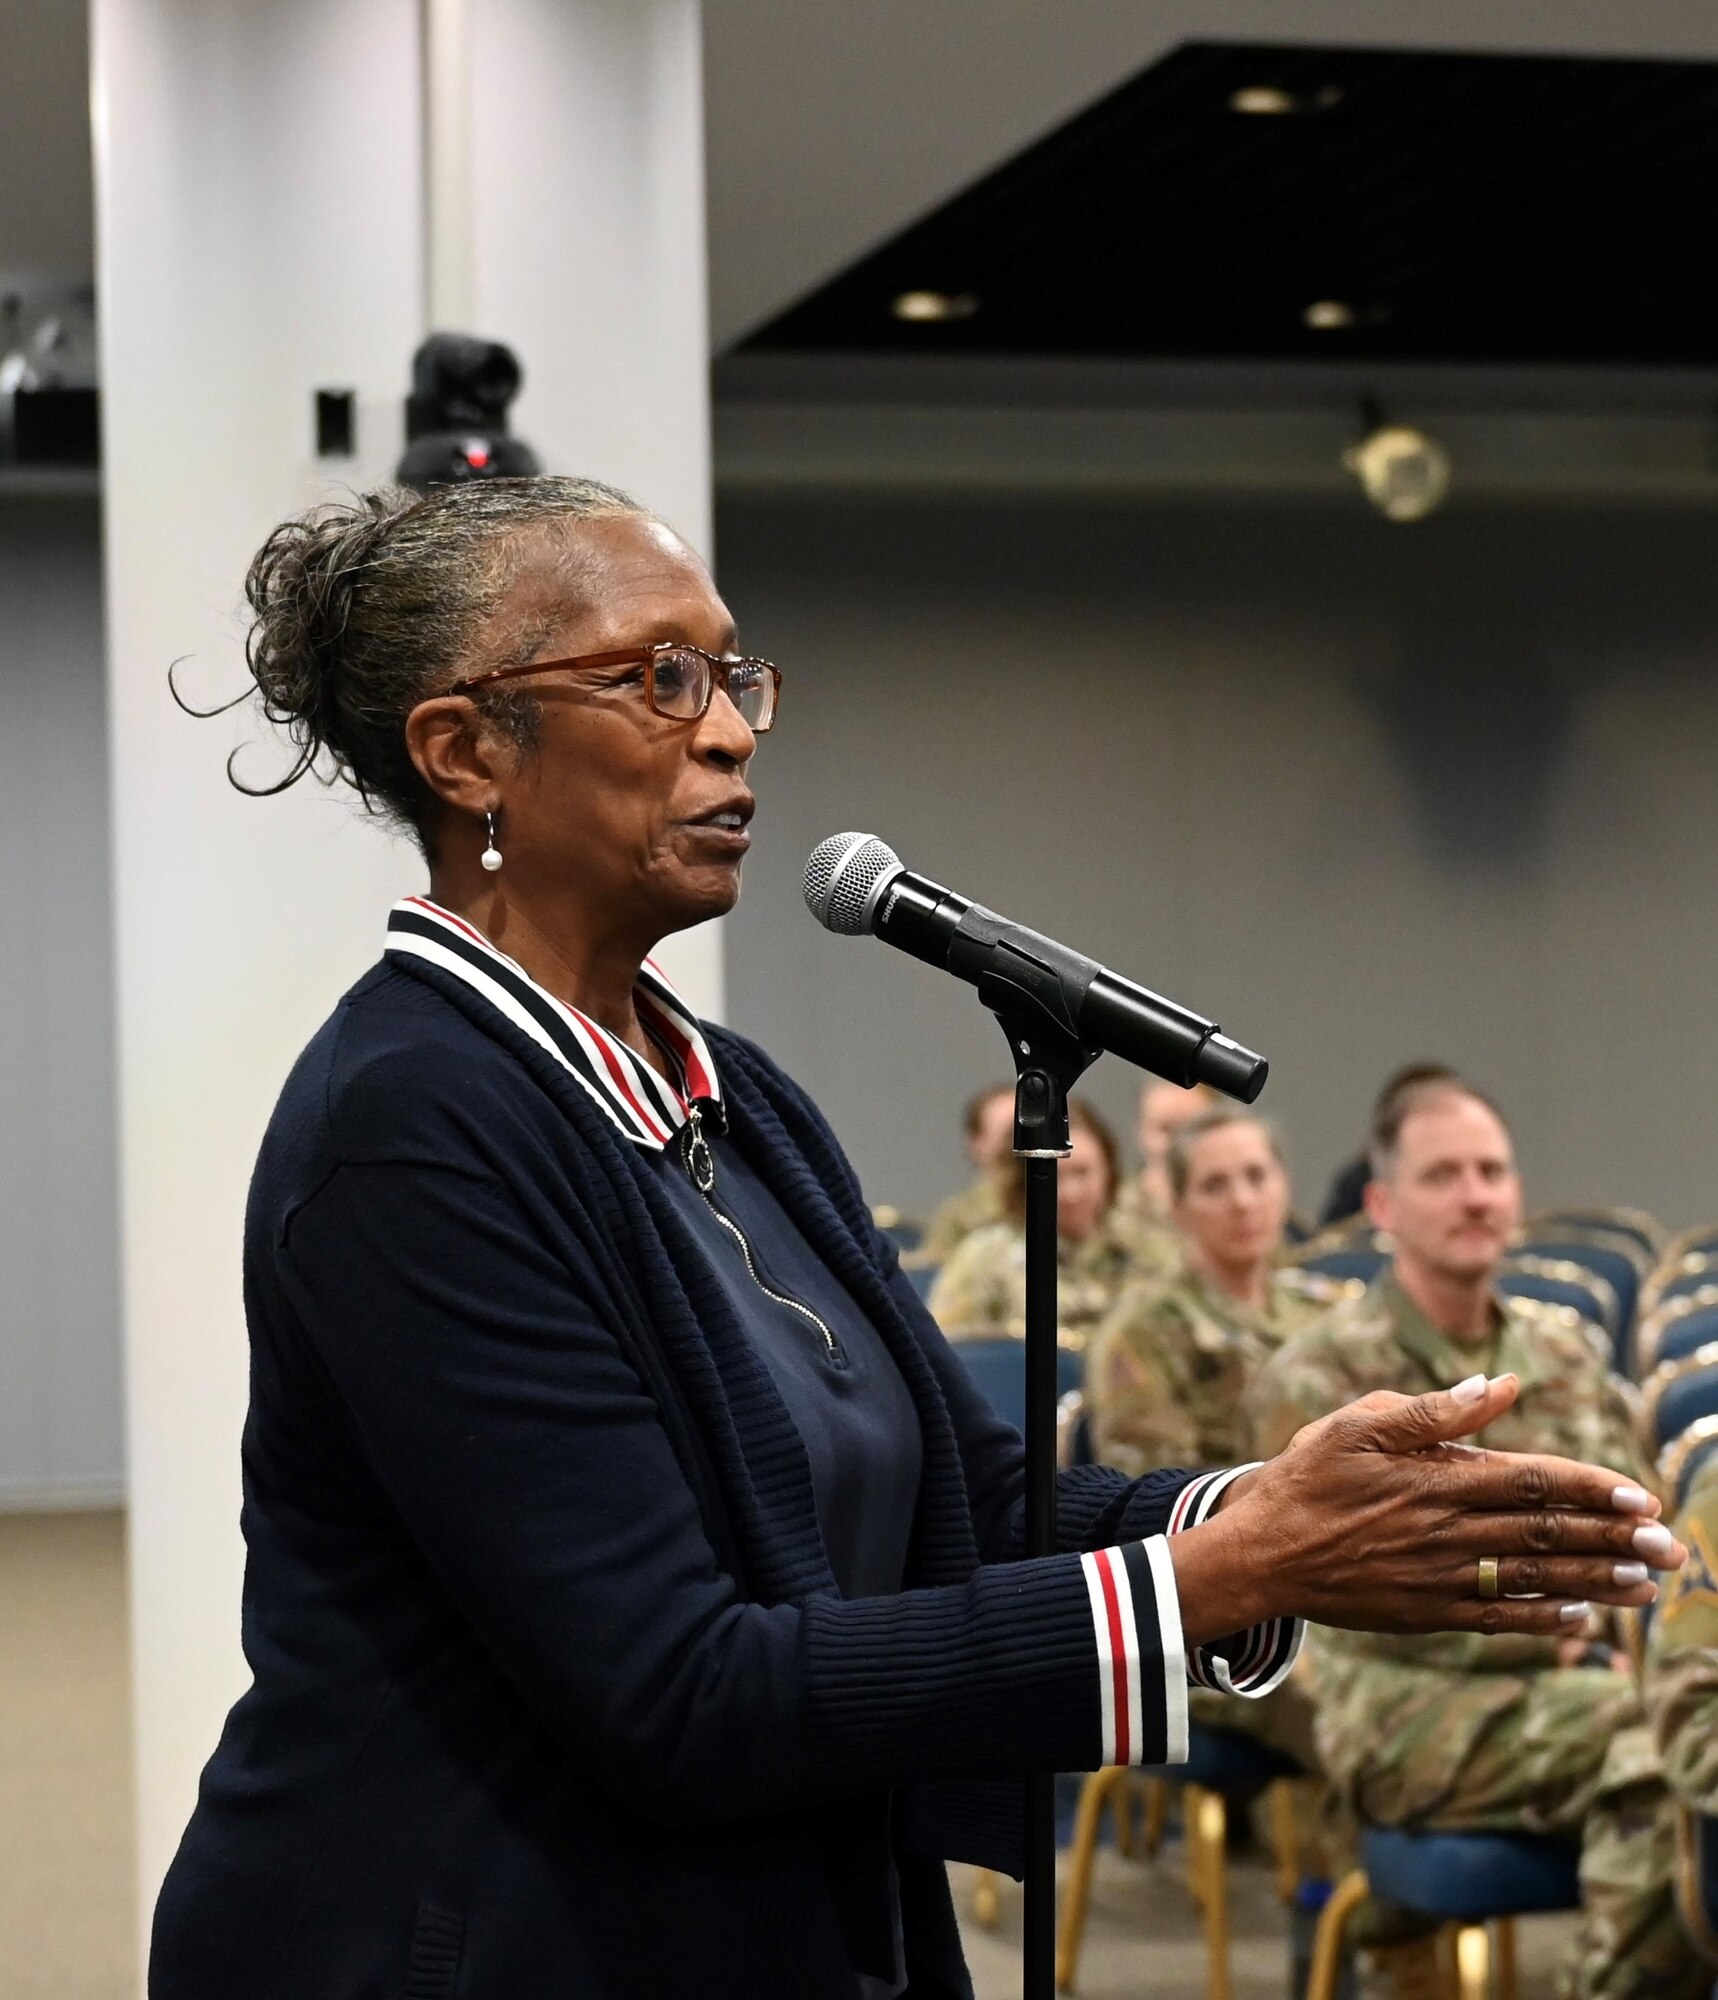 Major Brenda Threatt, Veterans Center Director, El Camino College stepped up to share her appreciation at the microphone during the Los Angeles Air Force Bases’s Women In Leadership Panel and applauded the speakers. Guardians and Airmen seated are captured in the background.